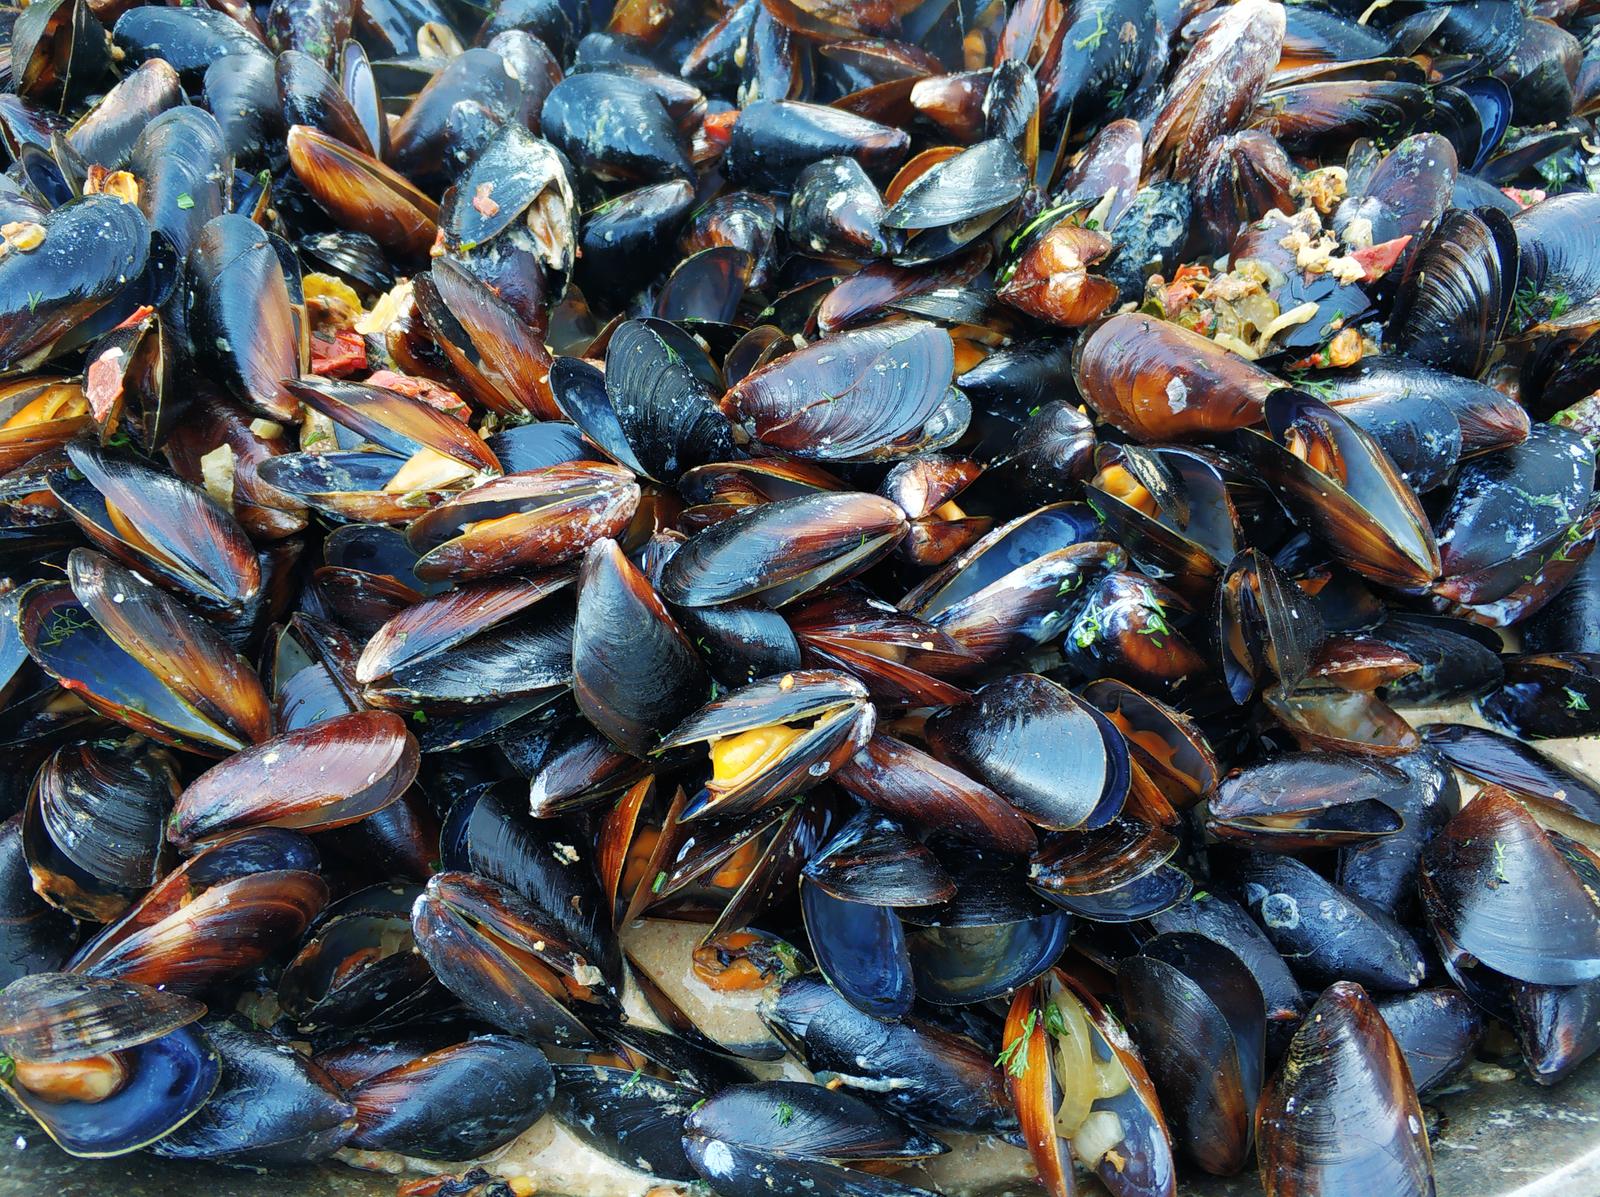 Can You Compost Mussel Shells? Exploring the Environmental Benefits and Practical Considerations